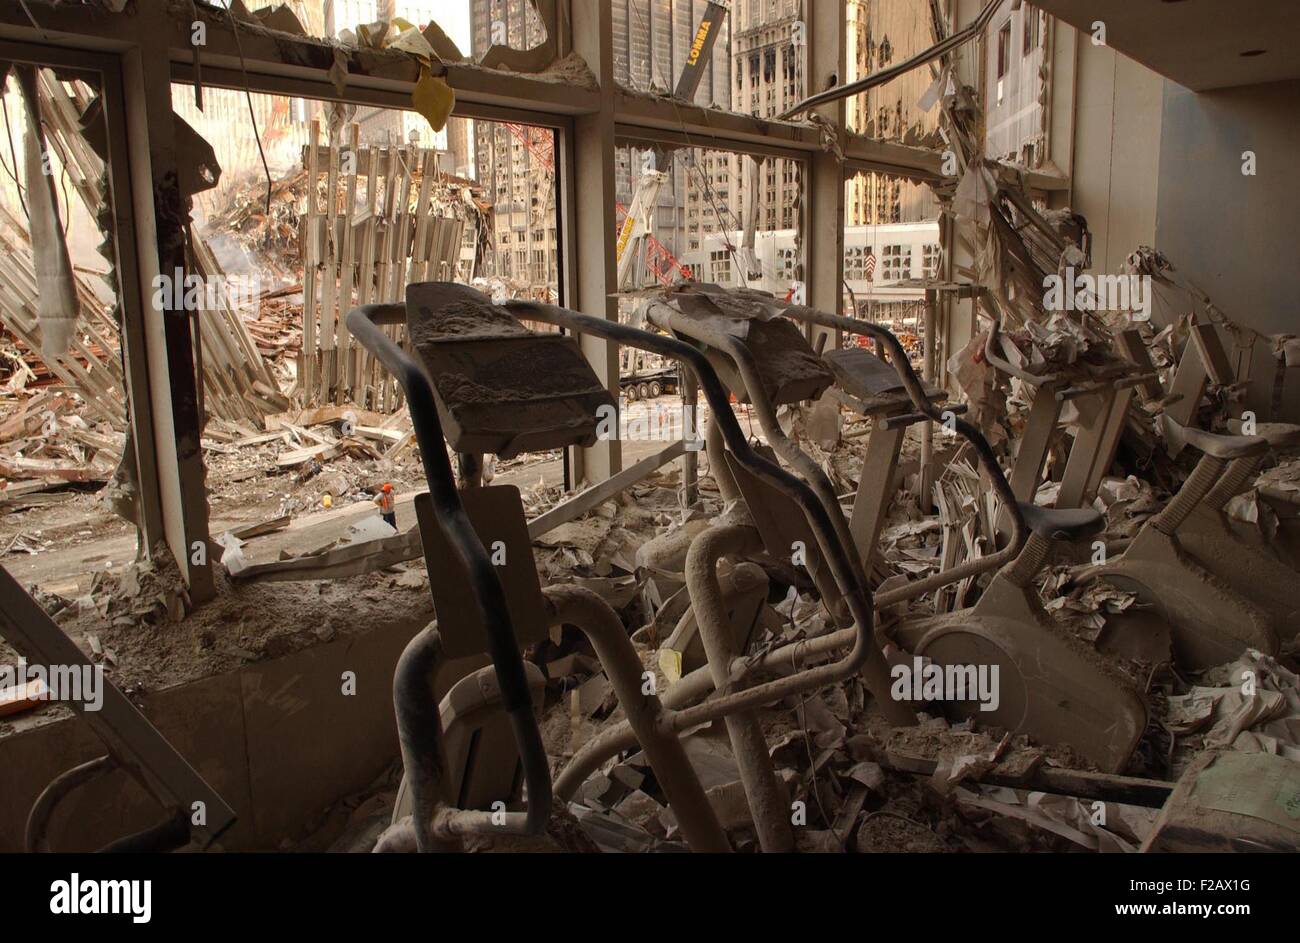 A health club in World Financial Center 2 after the 9-11 attacks, Sept. 18, 2001. It was across the West Side Highway from WTC 1, the North Tower. World Trade Center, New York City, after September 11, 2001 terrorist attacks. (BSLOC_2015_2_98) Stock Photo